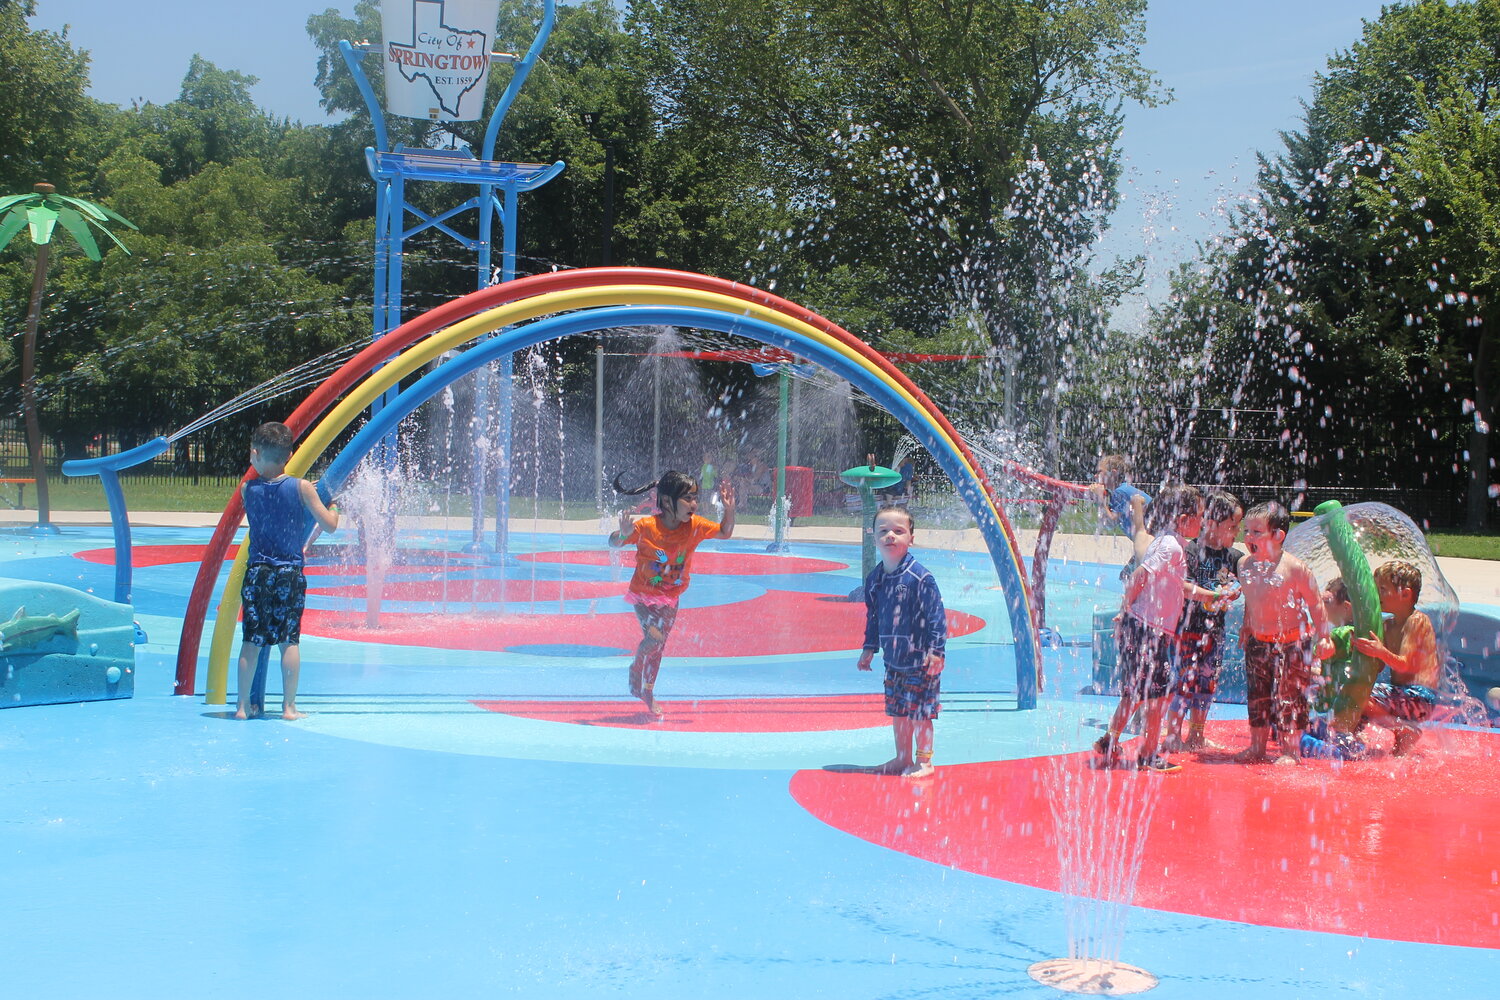 Children play in Springtown’s splash pad. The splash pad operated 2014-16 and has been closed since the 2017 season.